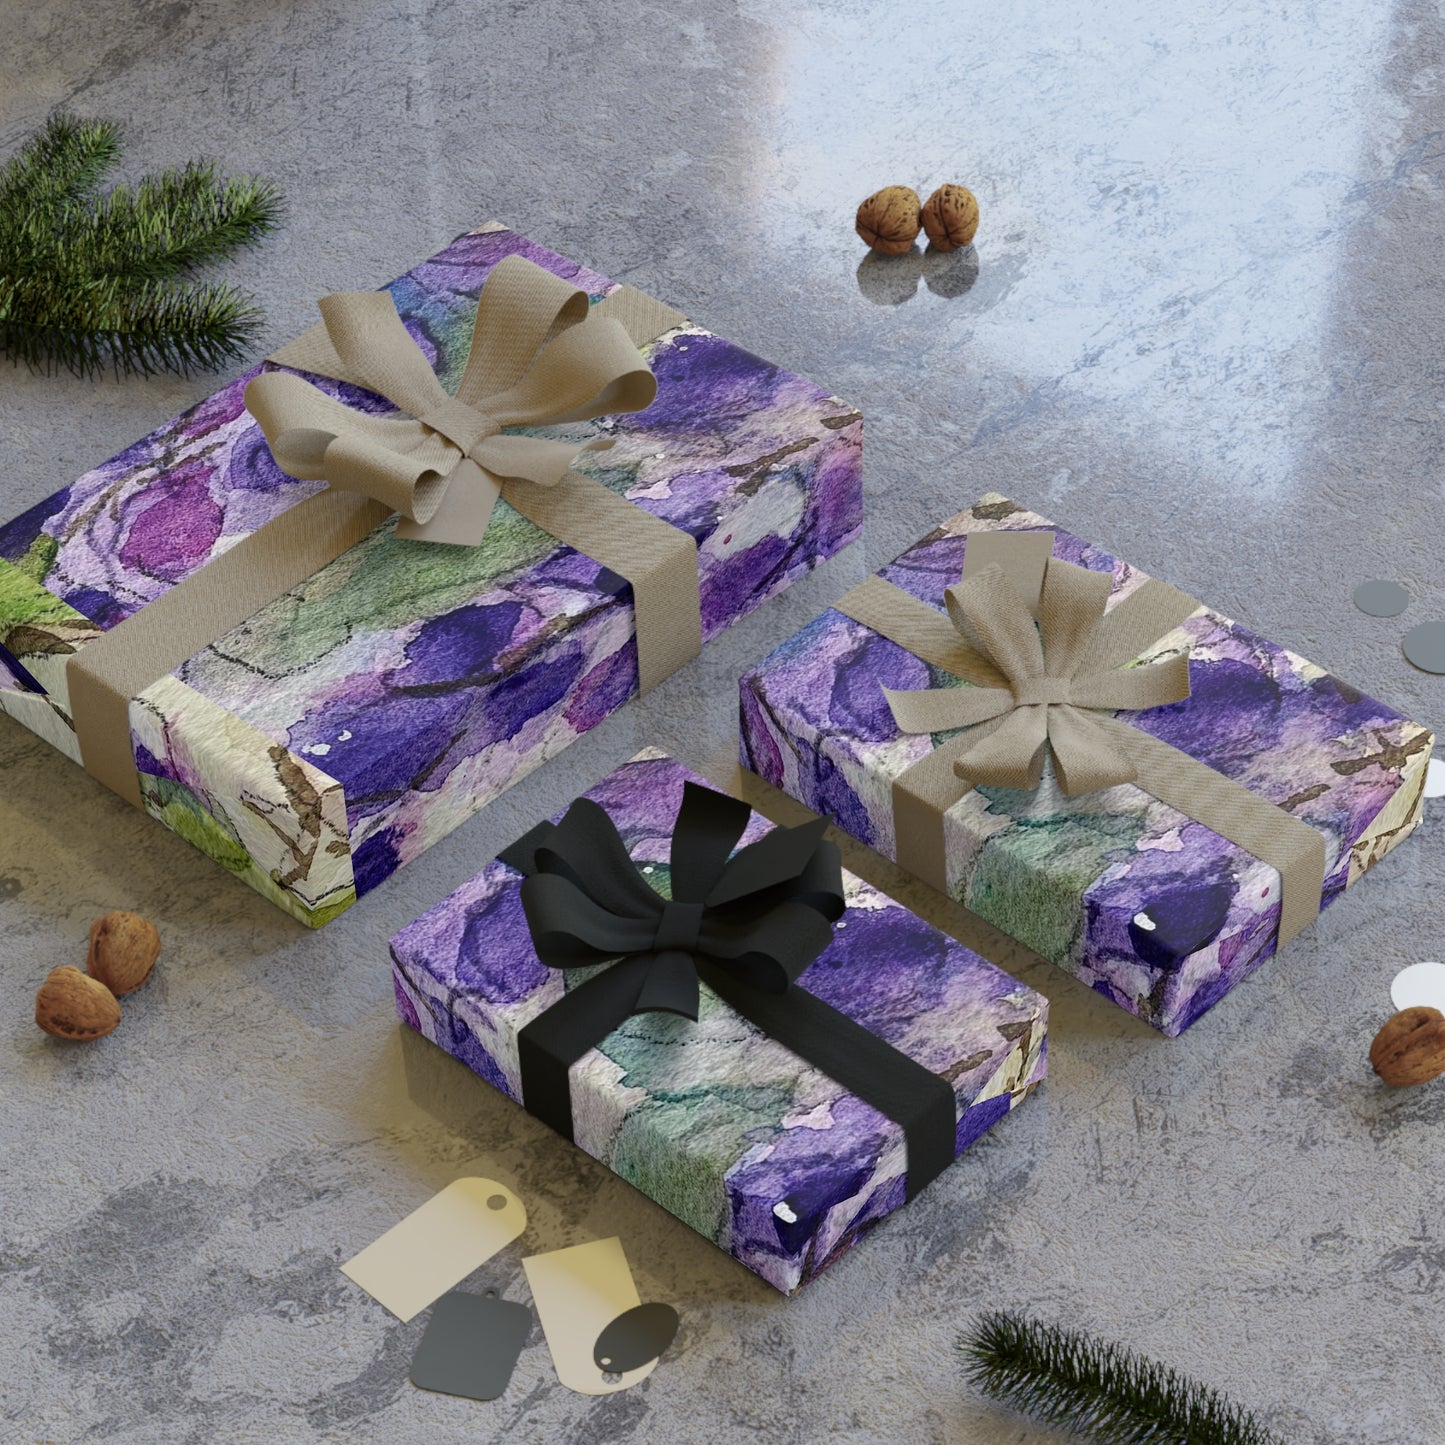 Roxy Rich Loose Floral Watercolor Purple Wisteria painting printed Gift Wrapping Paper Rolls, 1pc Wedding Mom Friend giftwrap